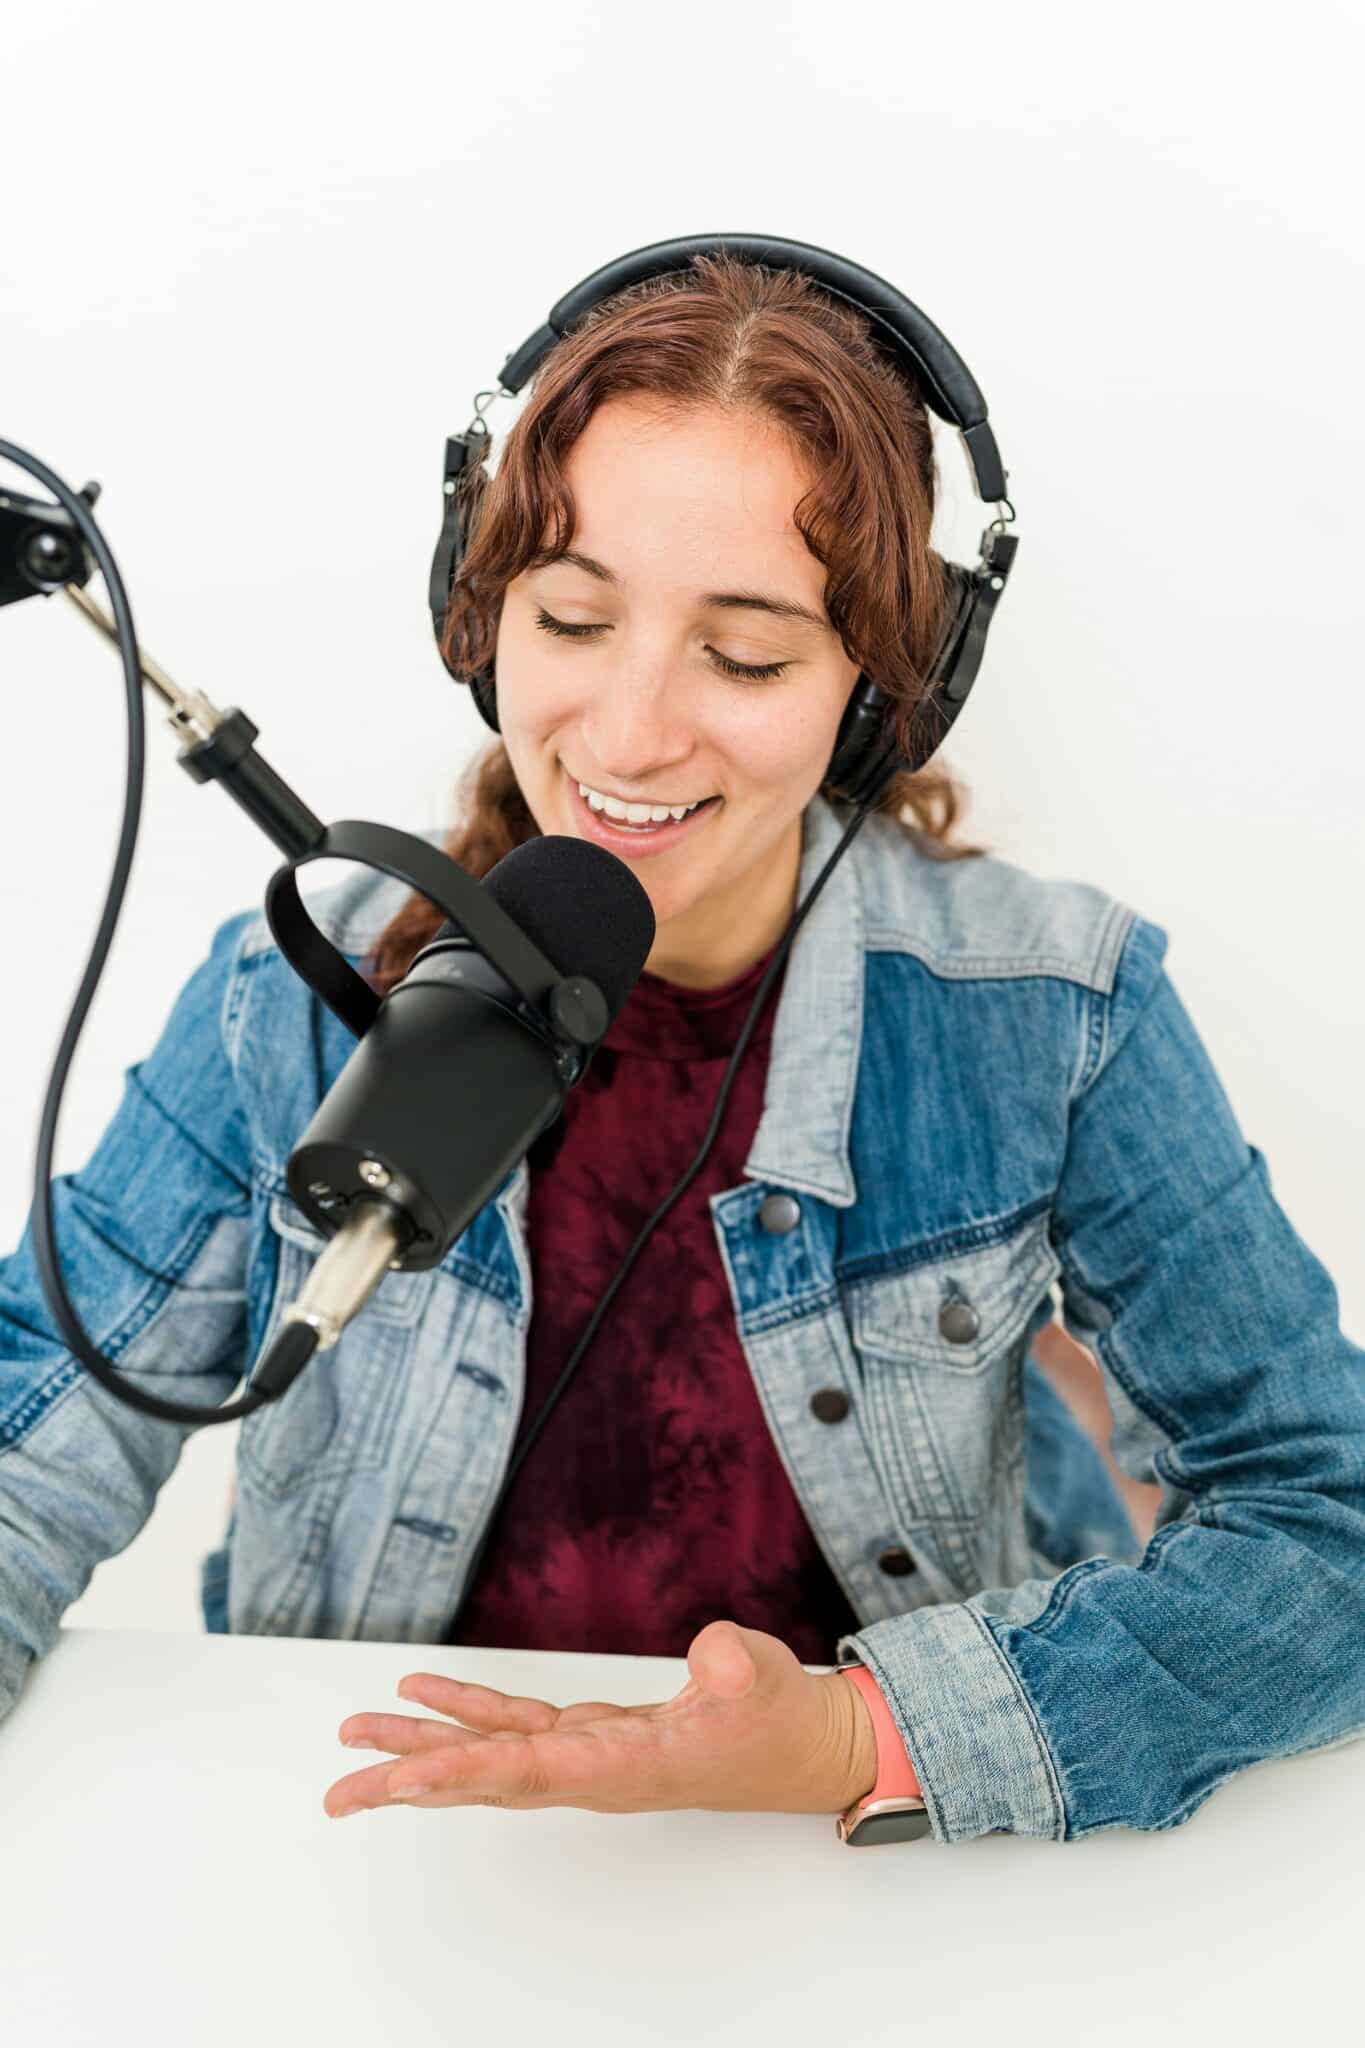 Photo of a podcaster with headphones talking into a microphone.